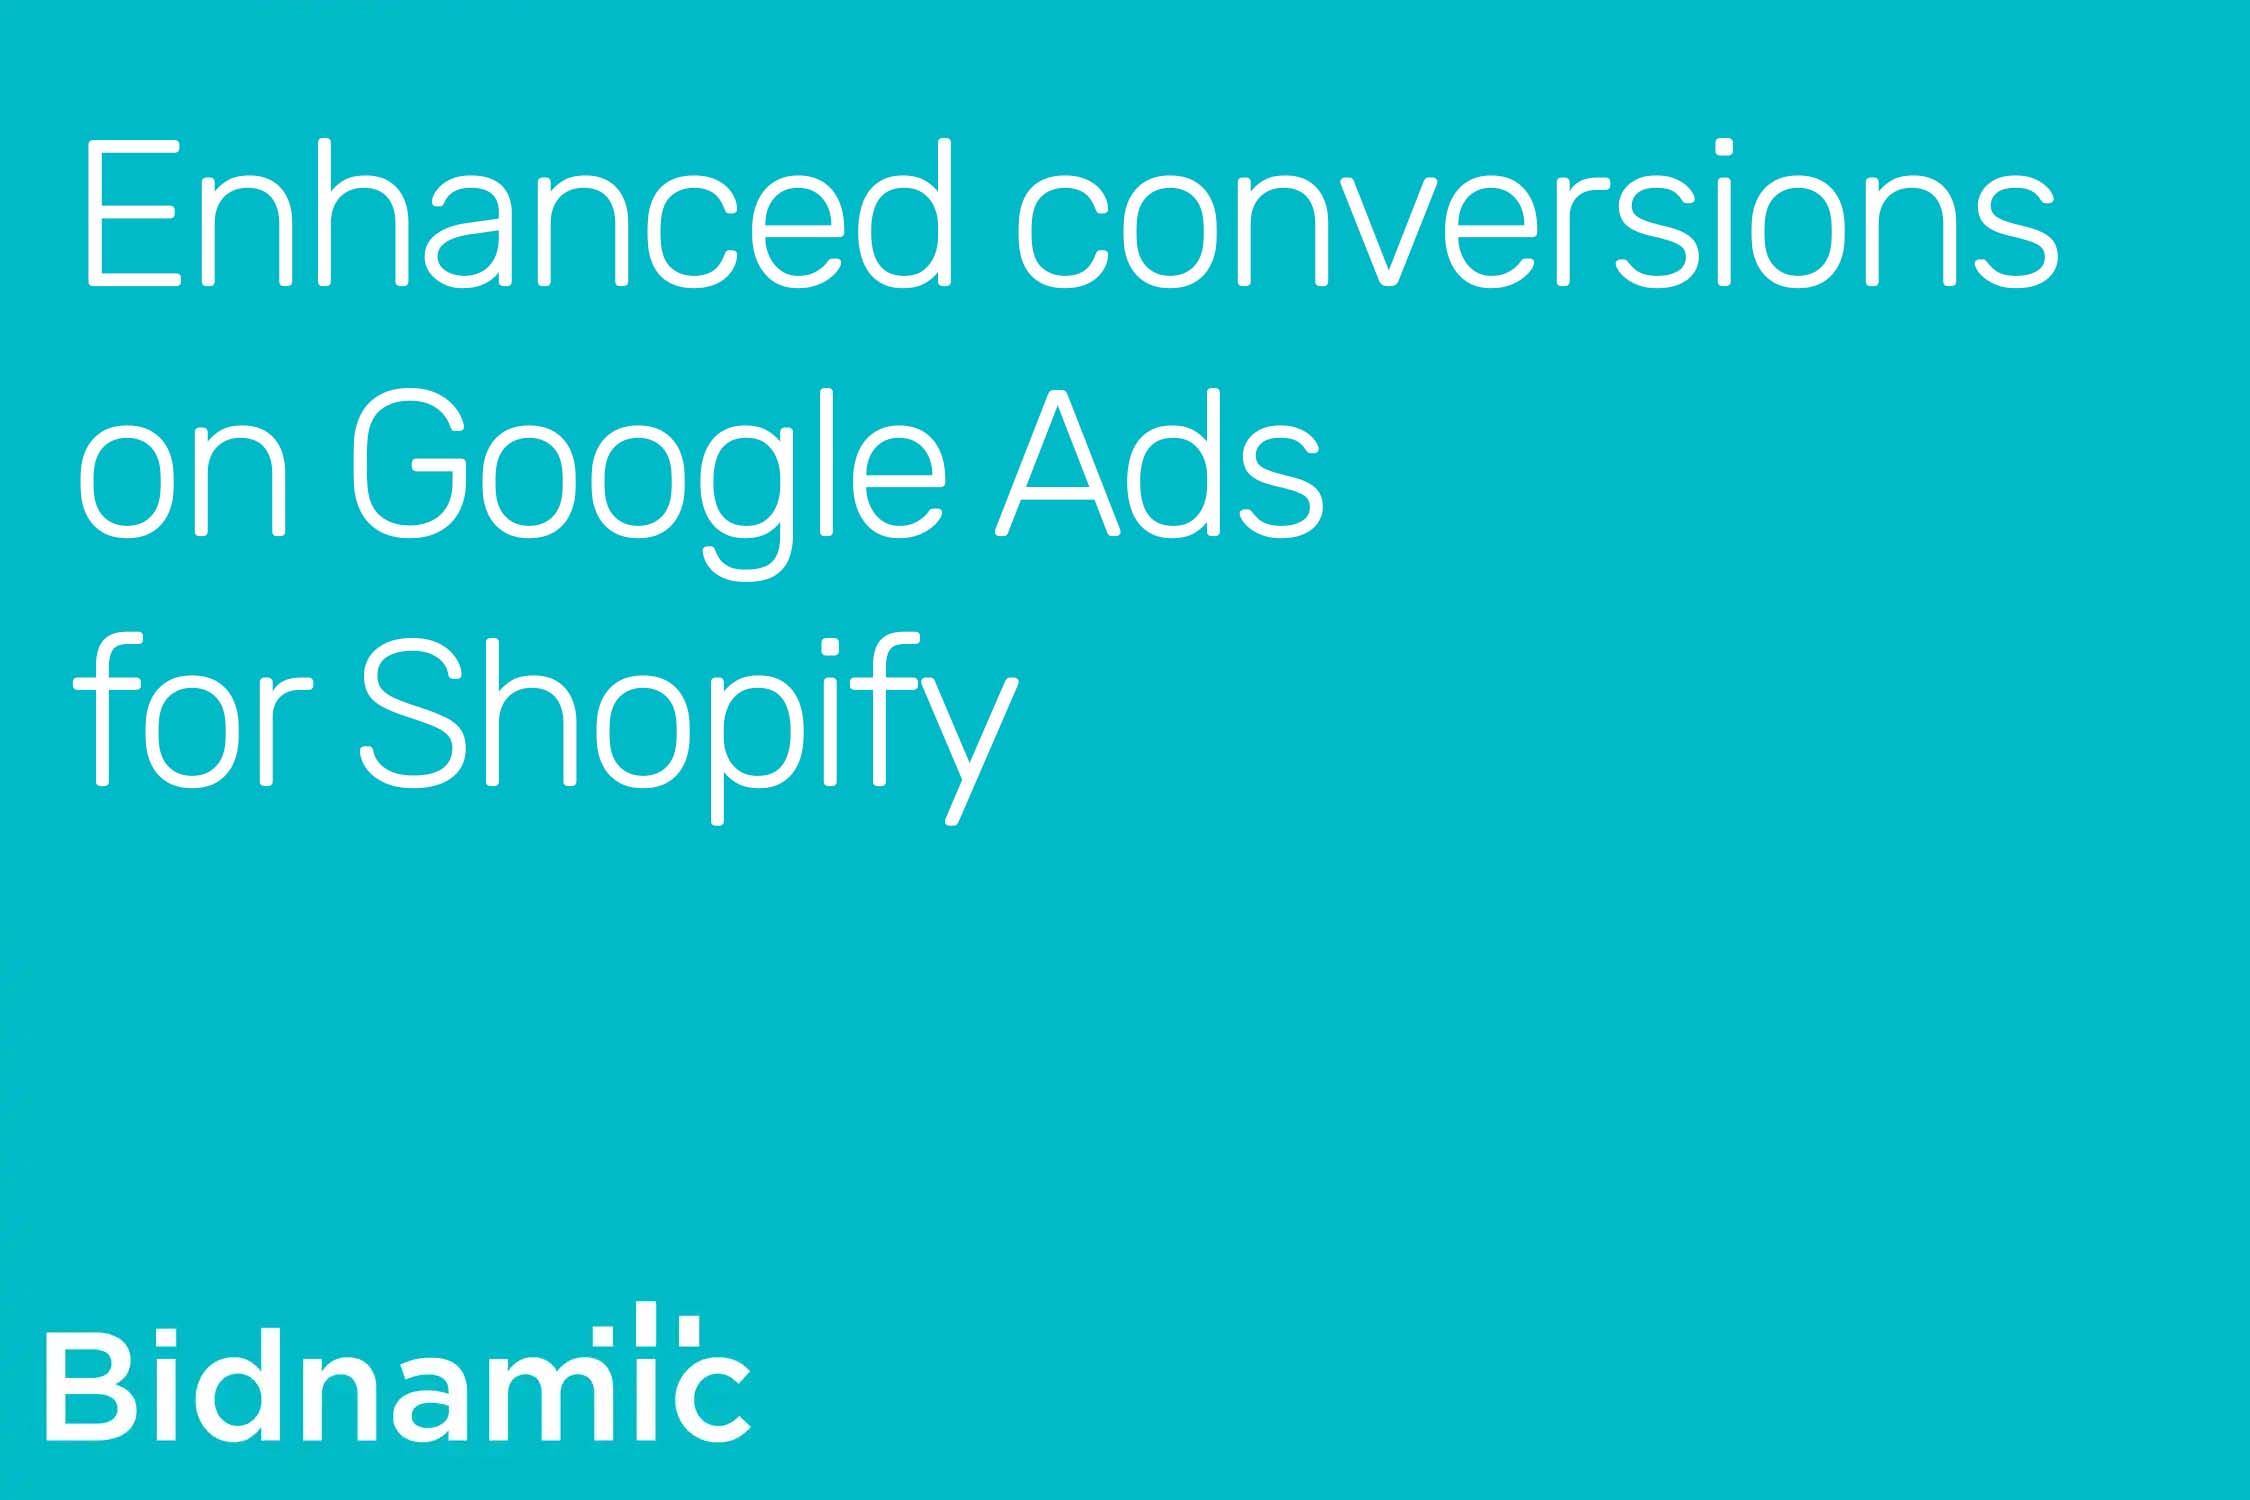 Enhanced conversions on Google Ads for Shopify